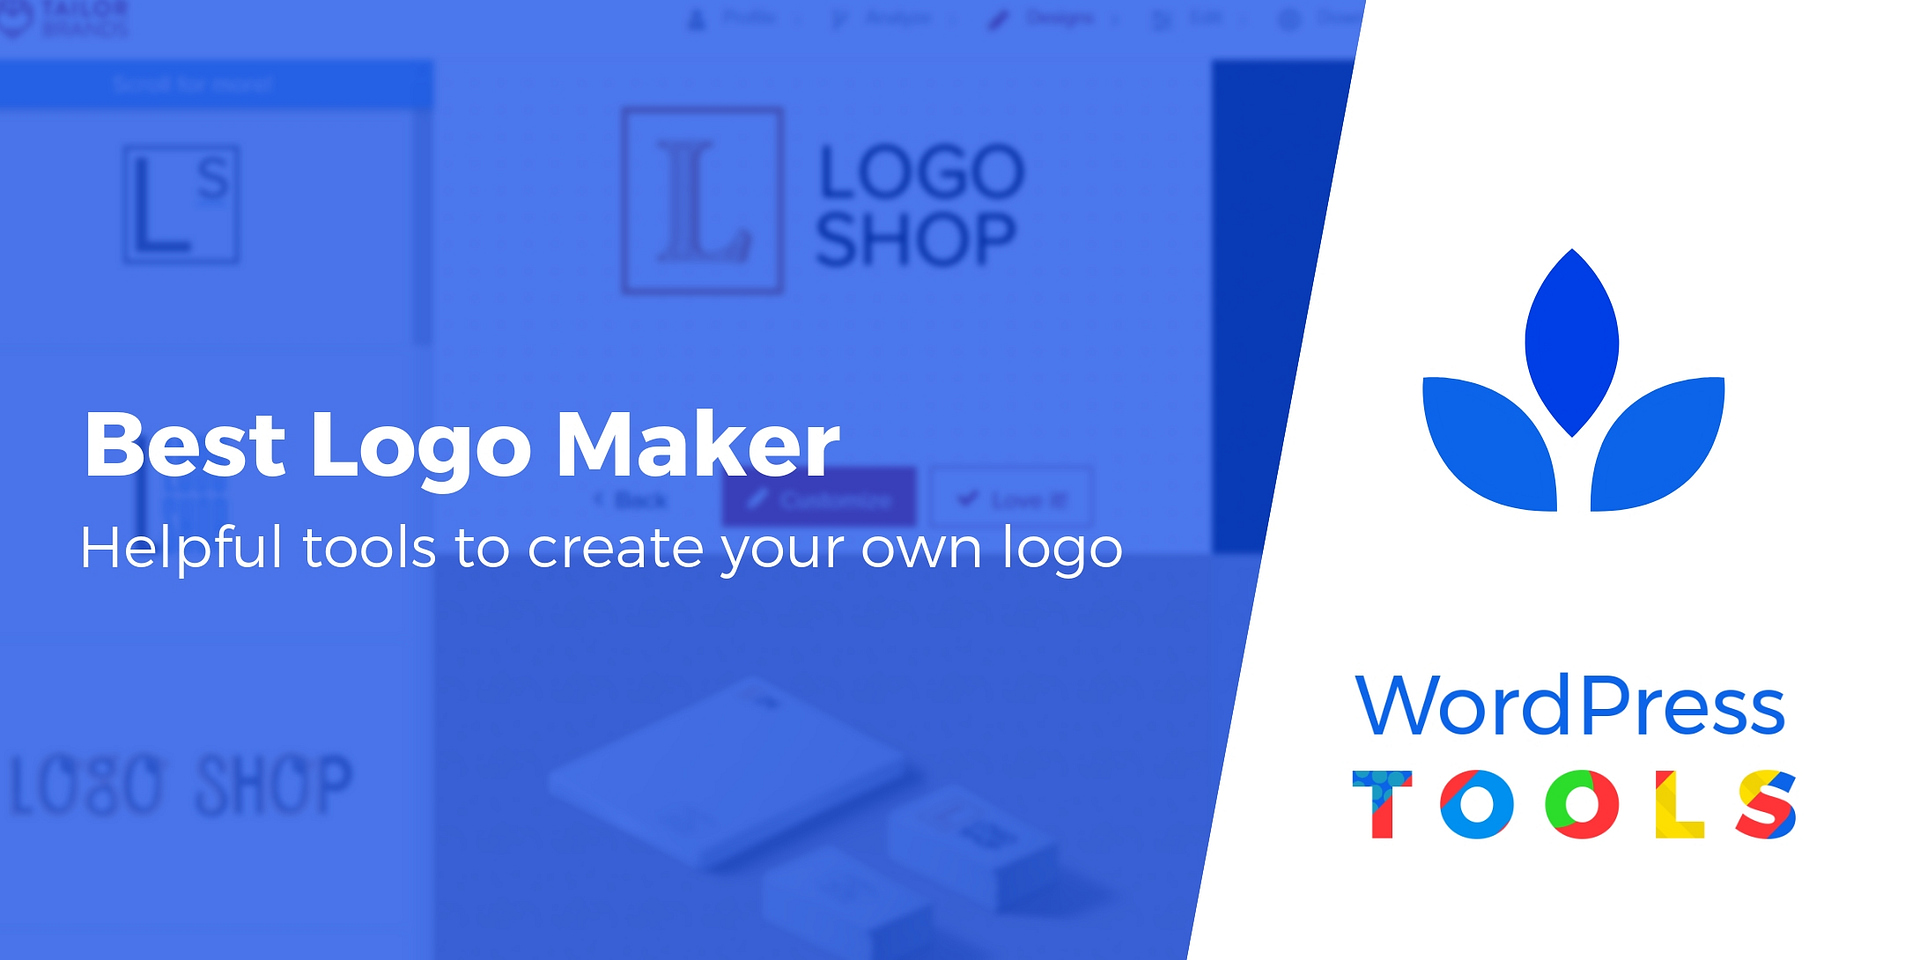 Best Logo Maker 10 Great Tools Compared For 2020 - roblox logo fancy